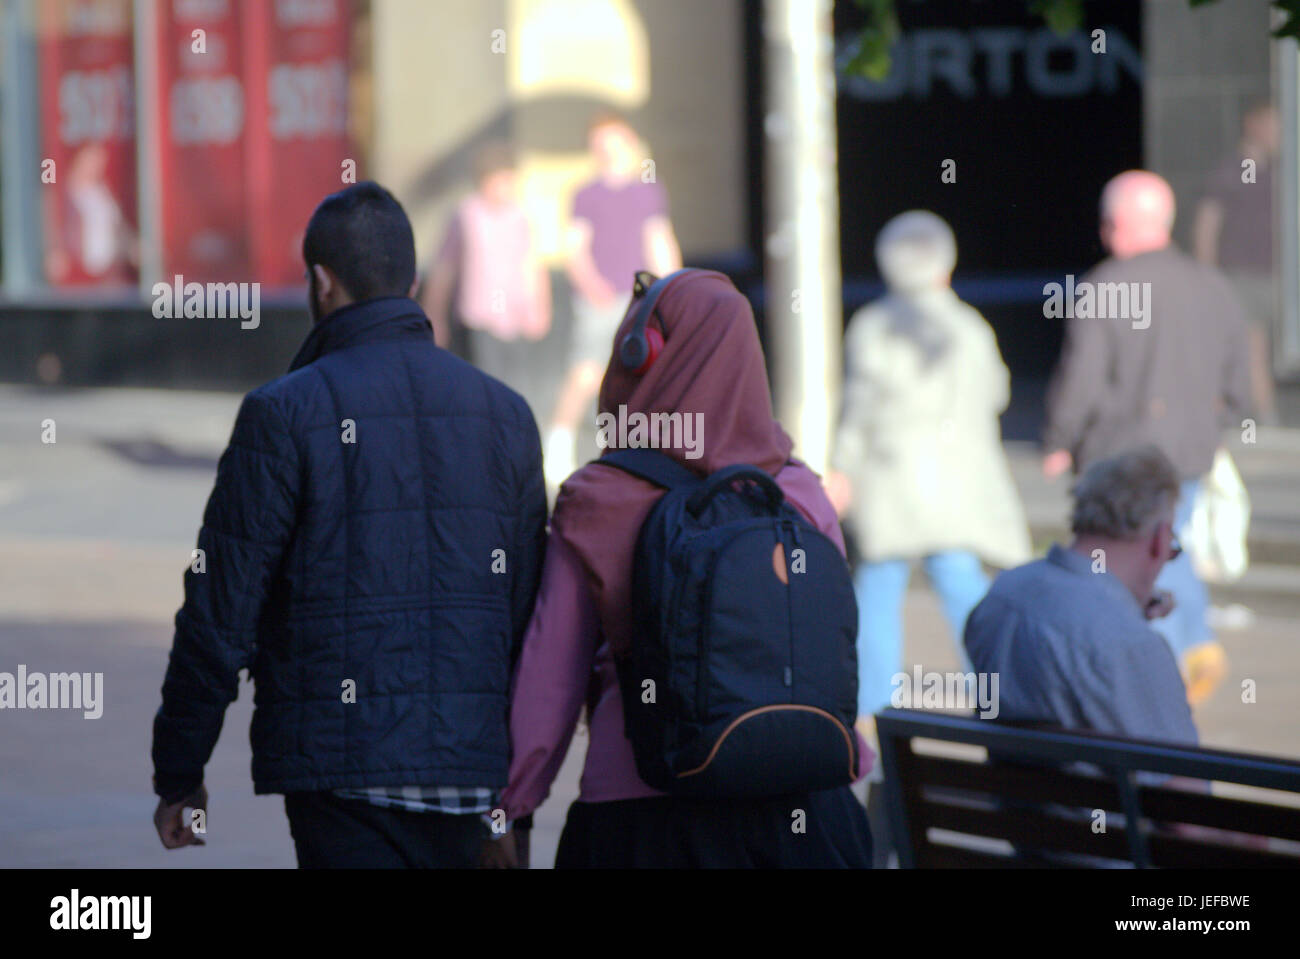 Asian family refugee dressed Hijab scarf on street in the UK everyday scene young couple girl headphones on scarf listening to music Stock Photo